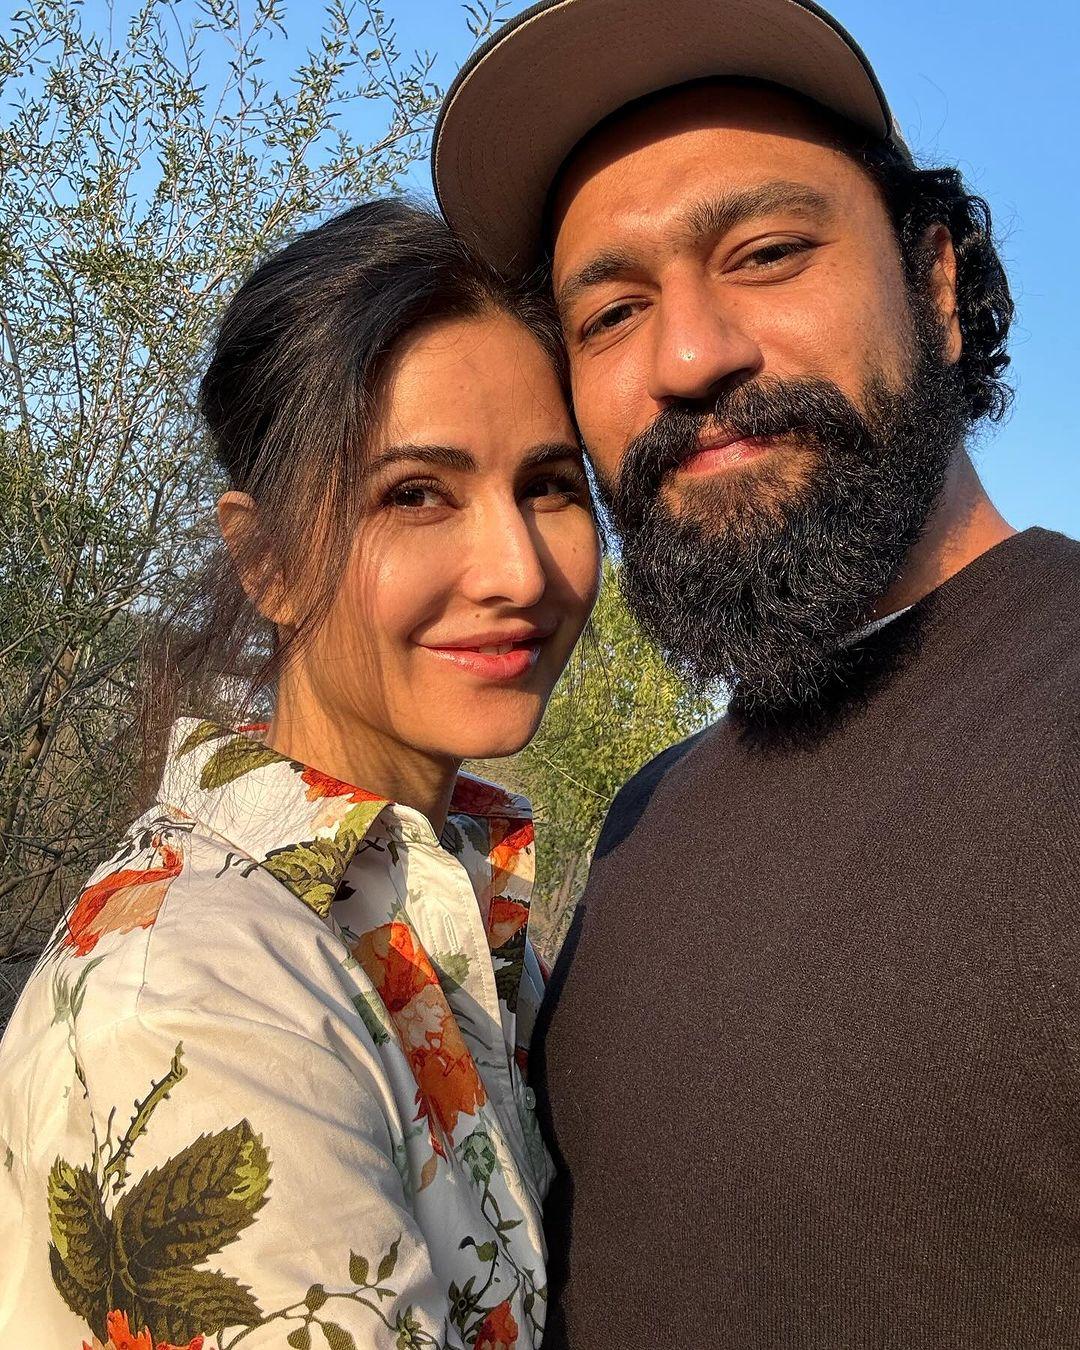 Vicky Kaushal and Katrina Kaif are an adorable couple who share pictures that brighten our day. The two lovebirds are currently enjoying their time together and have shared pictures to wish their fans a happy new year